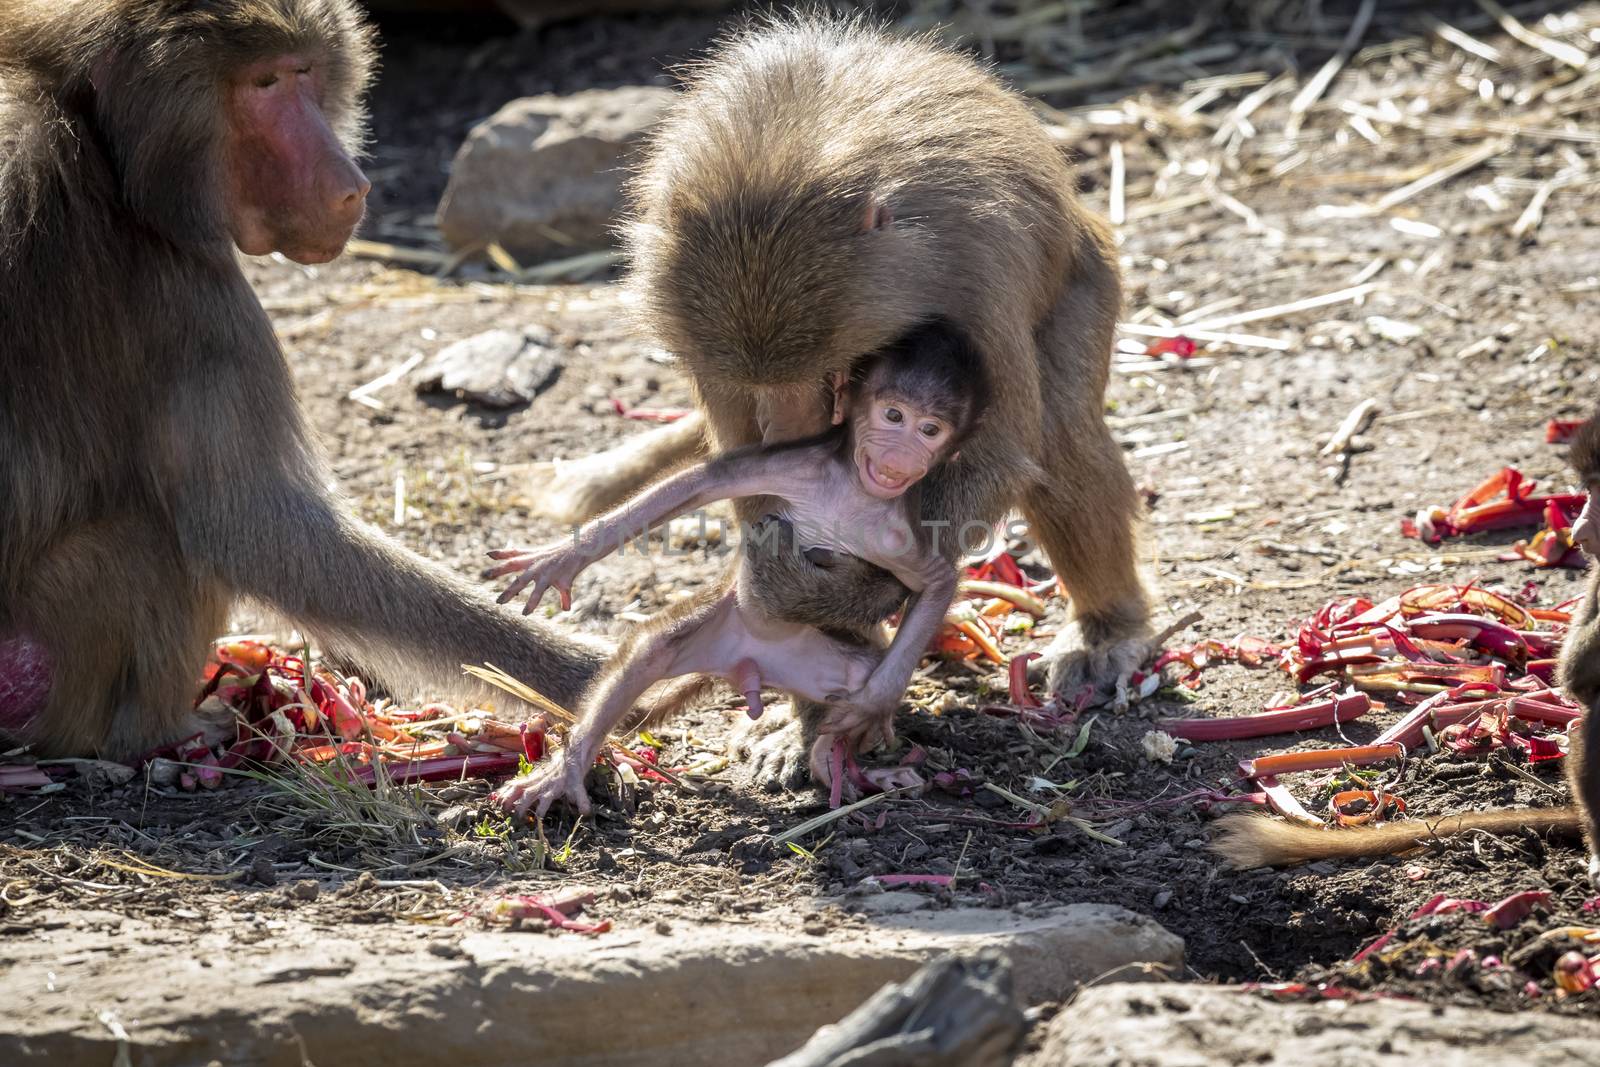 A baby Hamadryas Baboon playing outside with their family unit by WittkePhotos